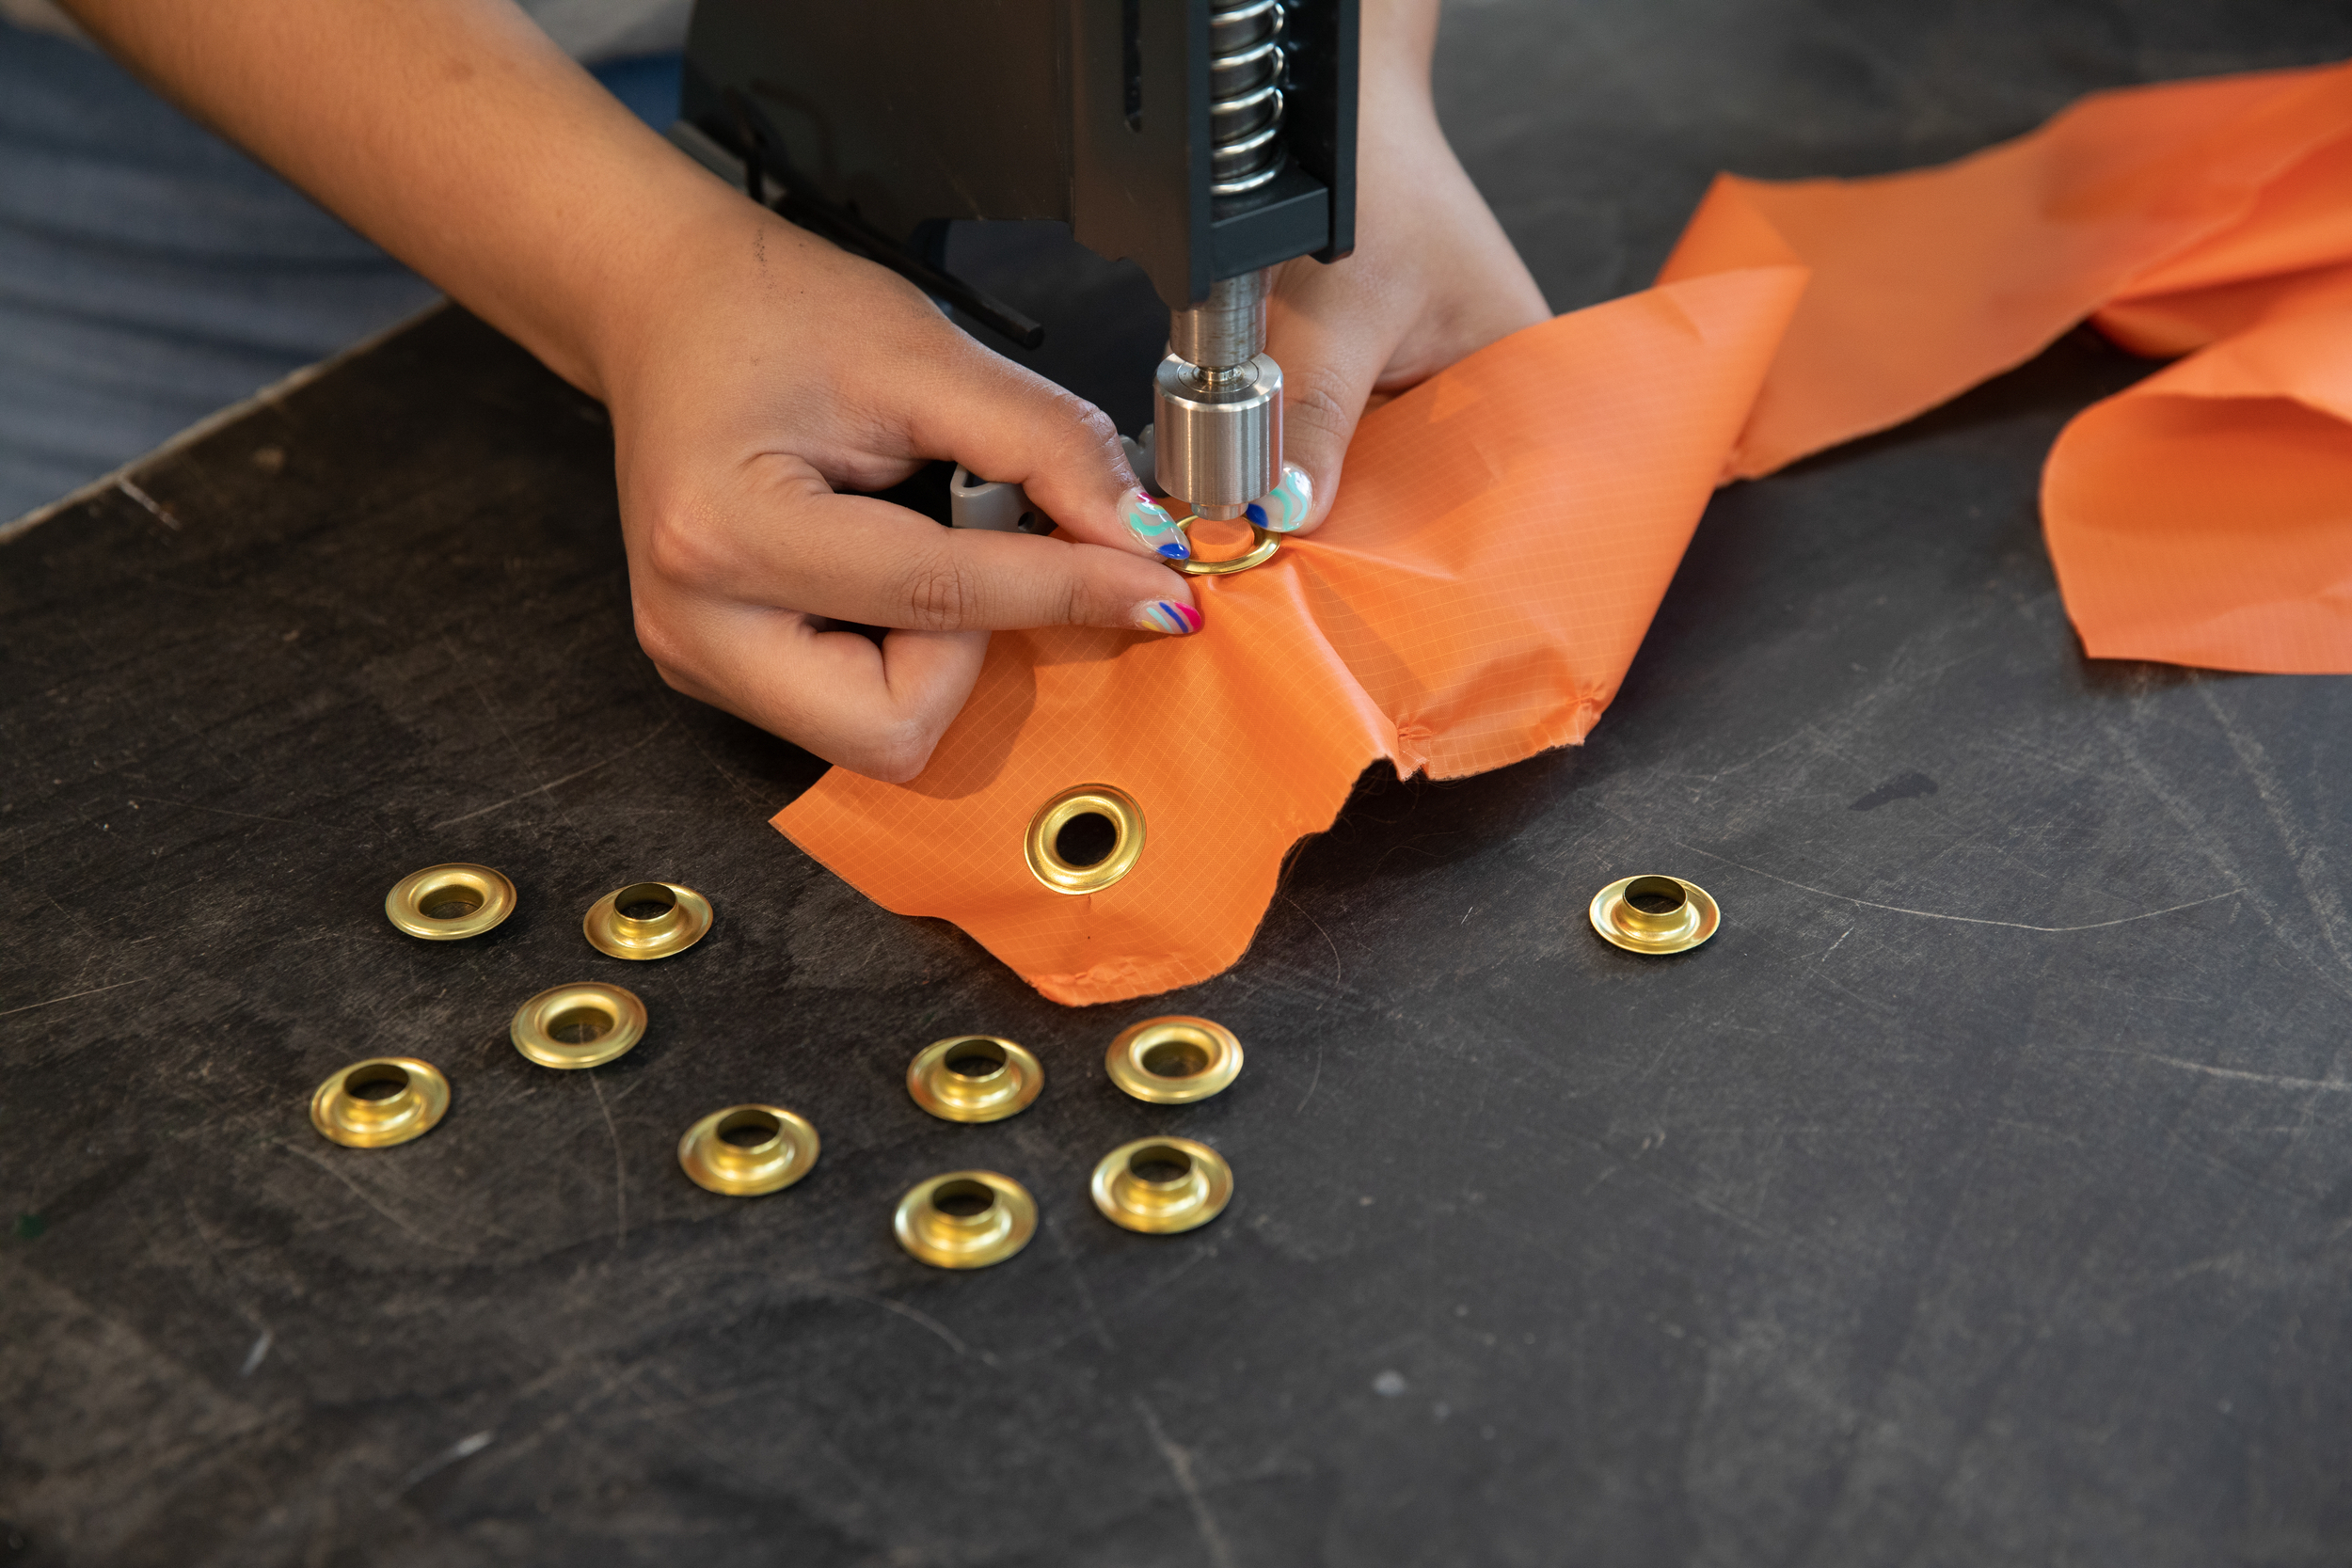 Hands adding eyelets to a piece of orange fabric using a special punch